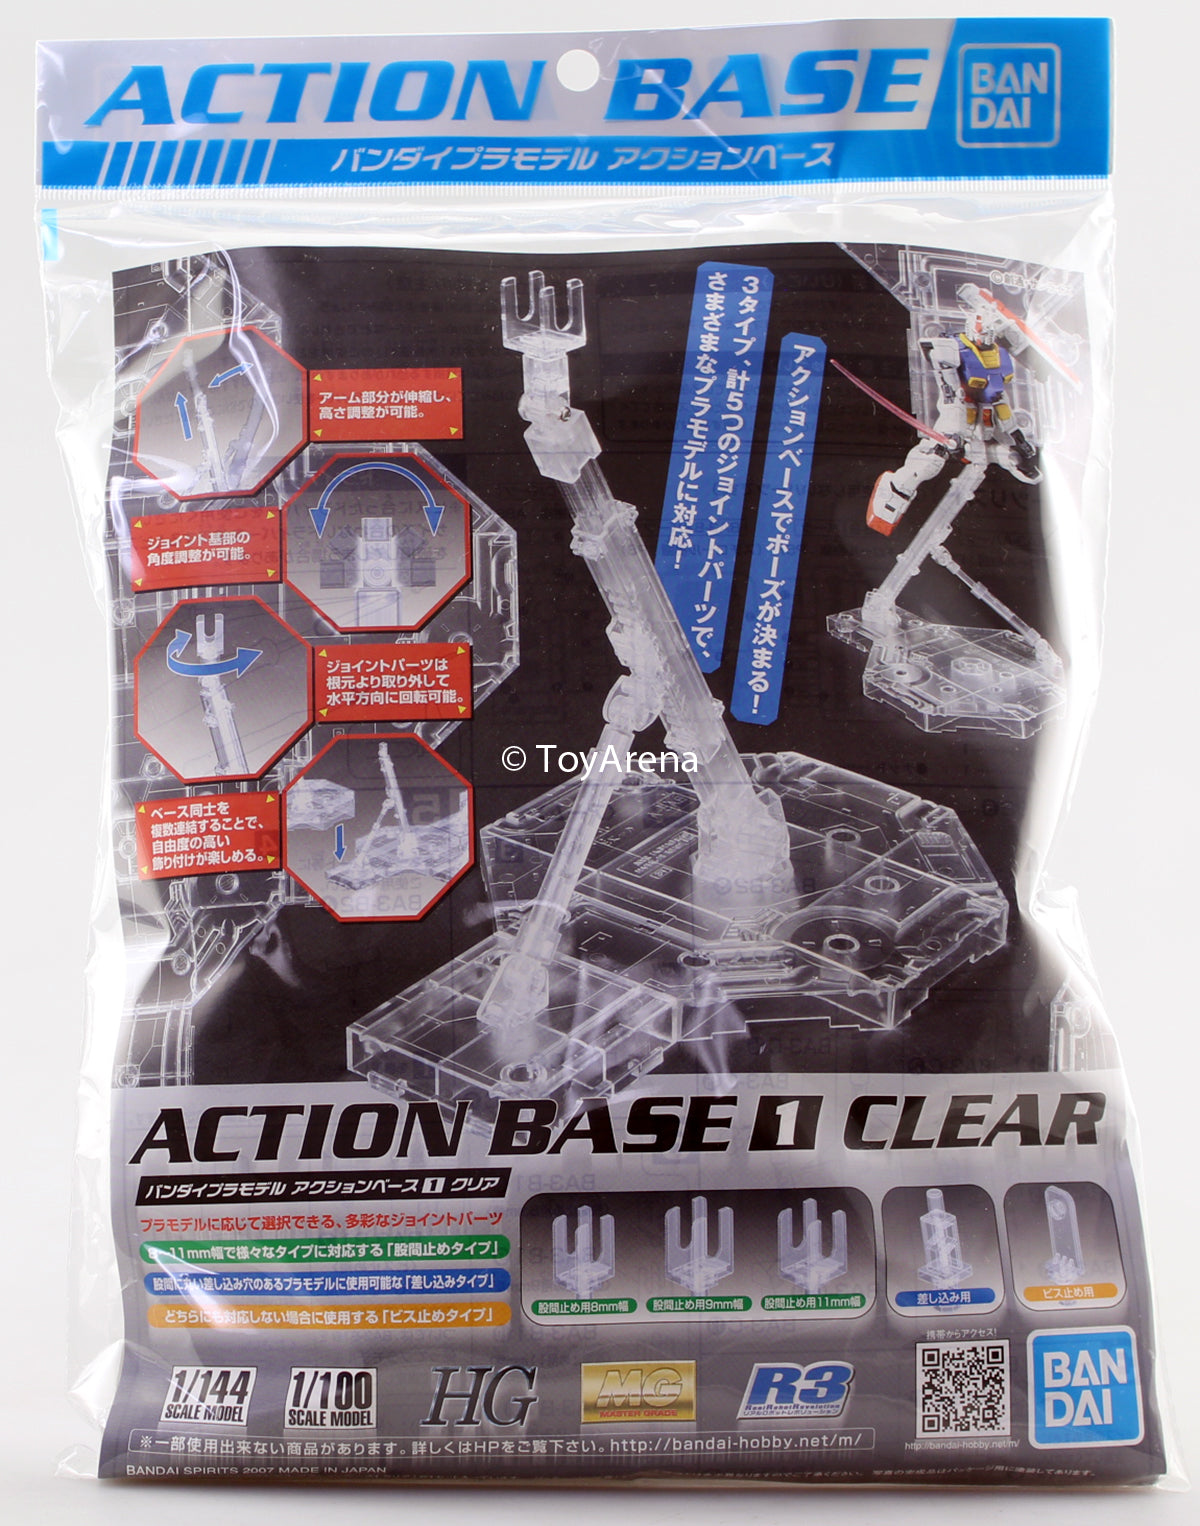 Gundam Action Base 1 Clear Stand Model Kit